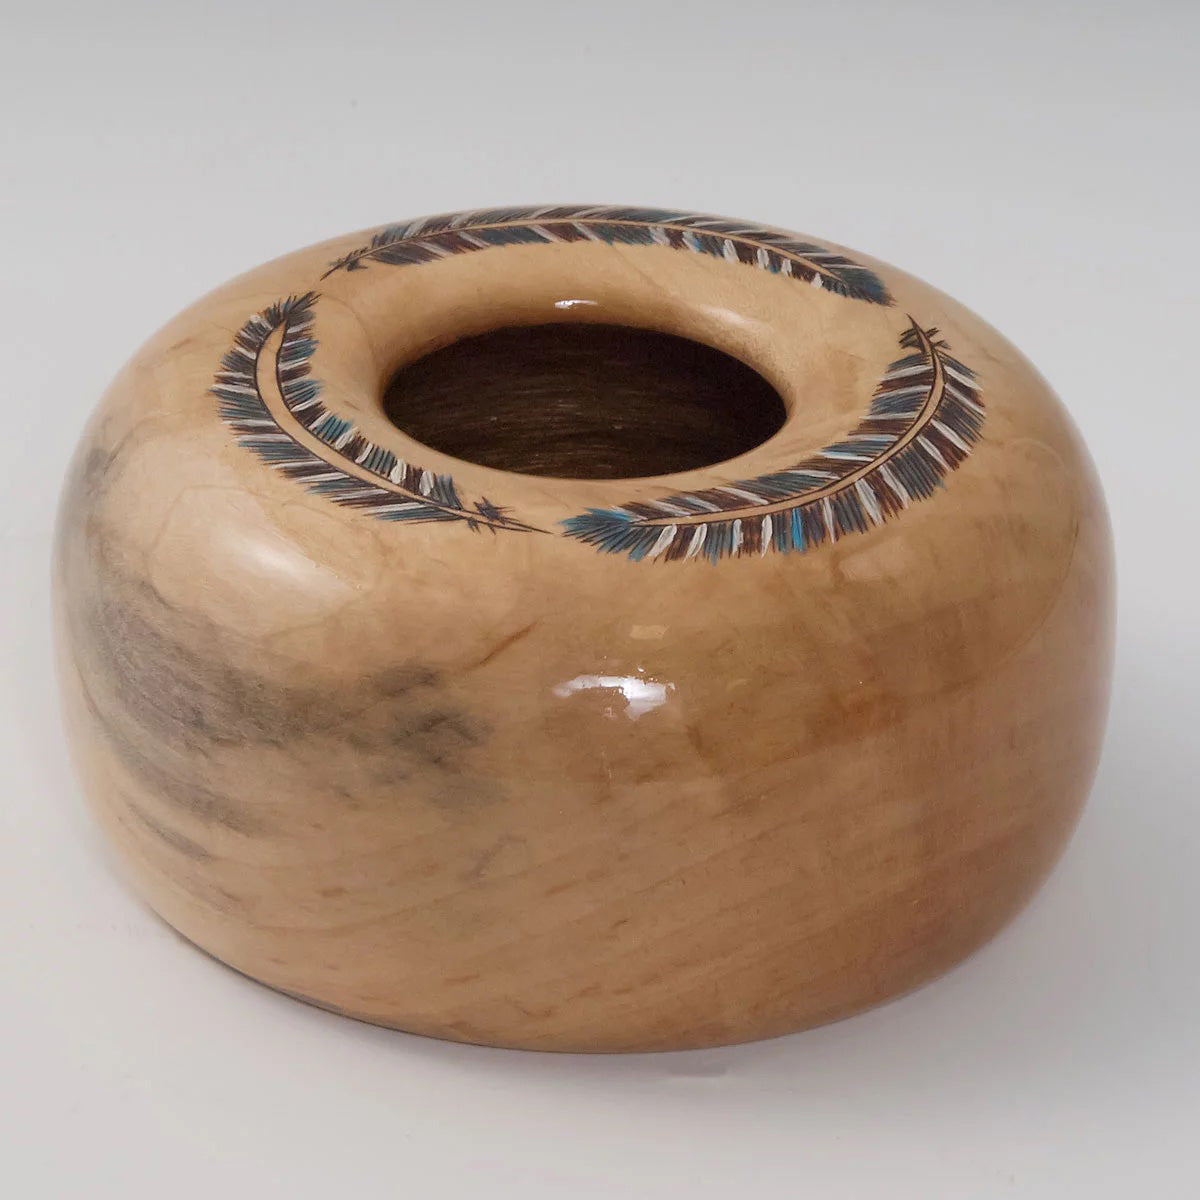 A light-colored woodturned vessel with feathers burned on the top edge. 